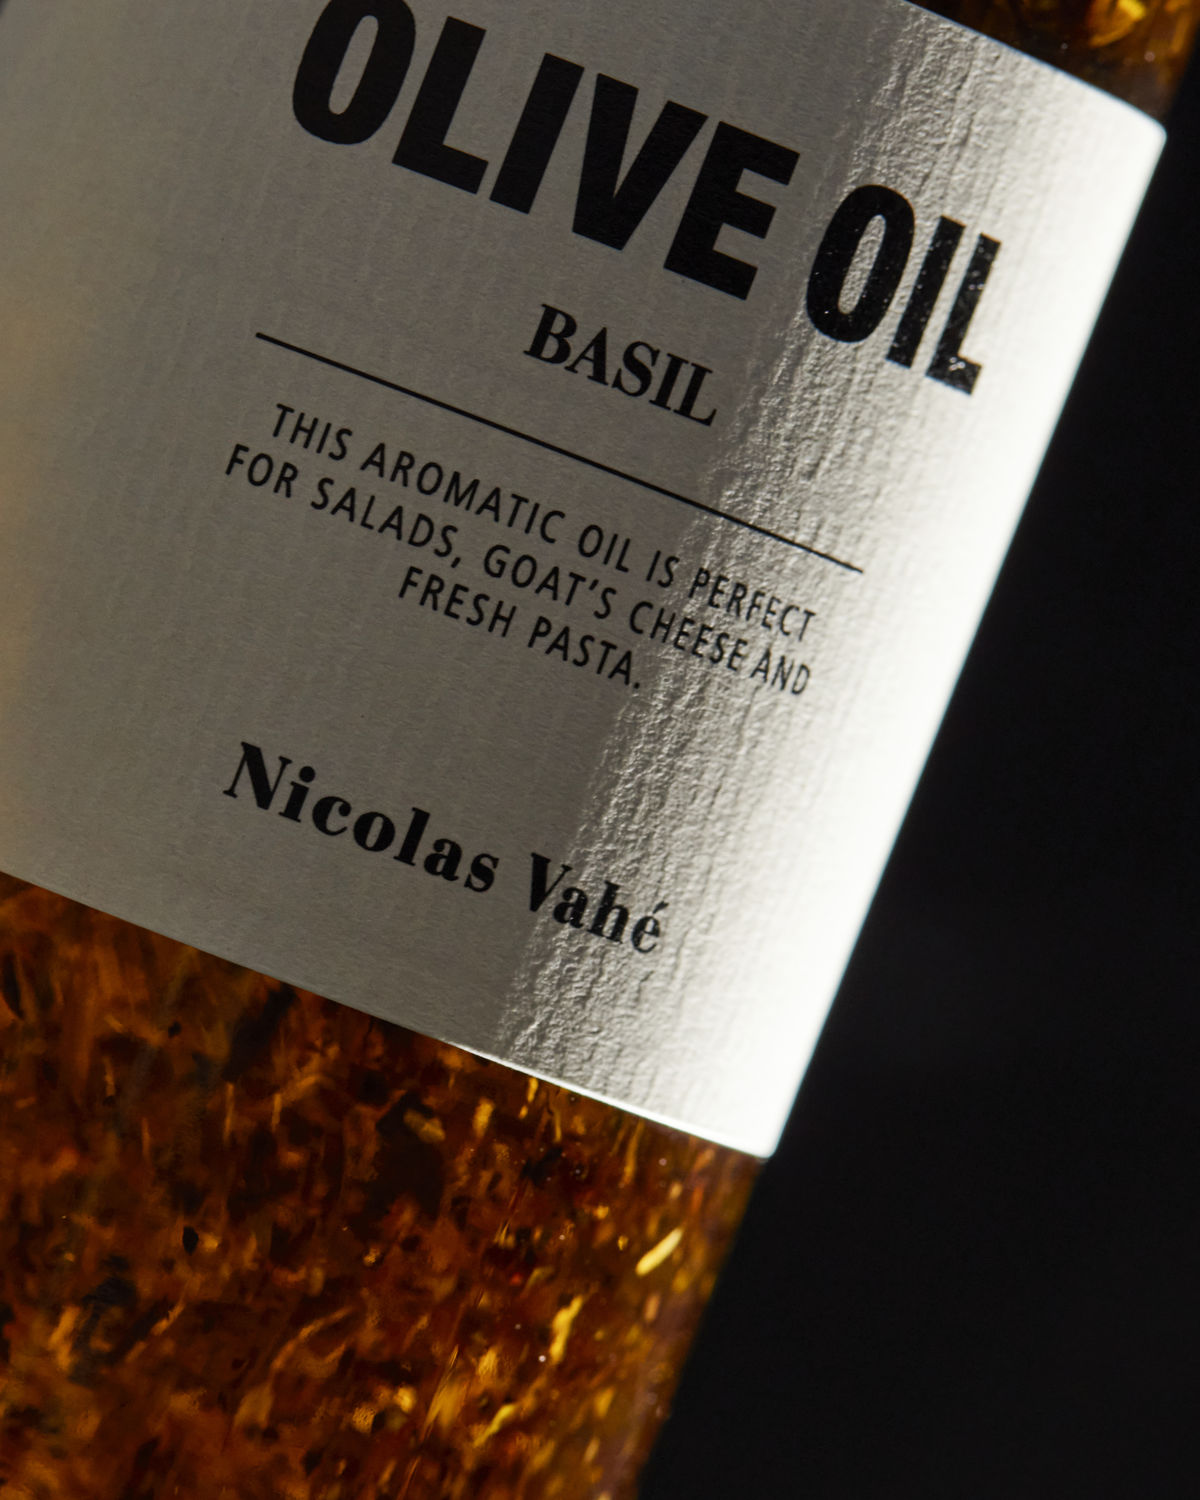 Olive oil with basil, 25 cl.